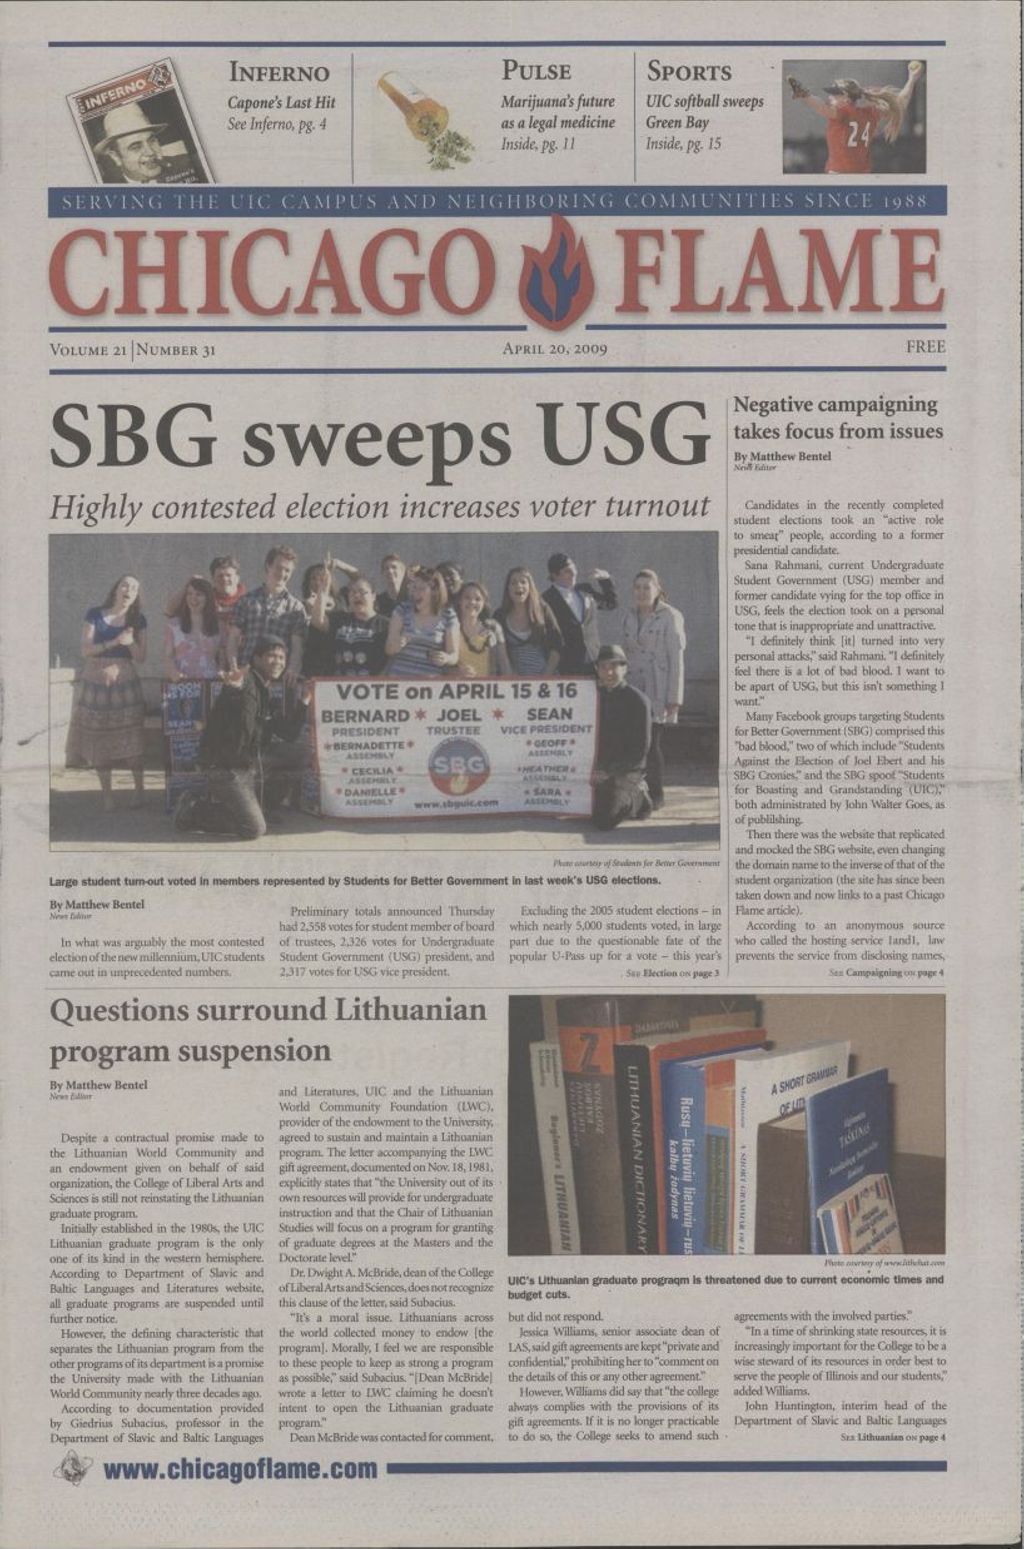 Miniature of Chicago Flame (April 20, 2009)